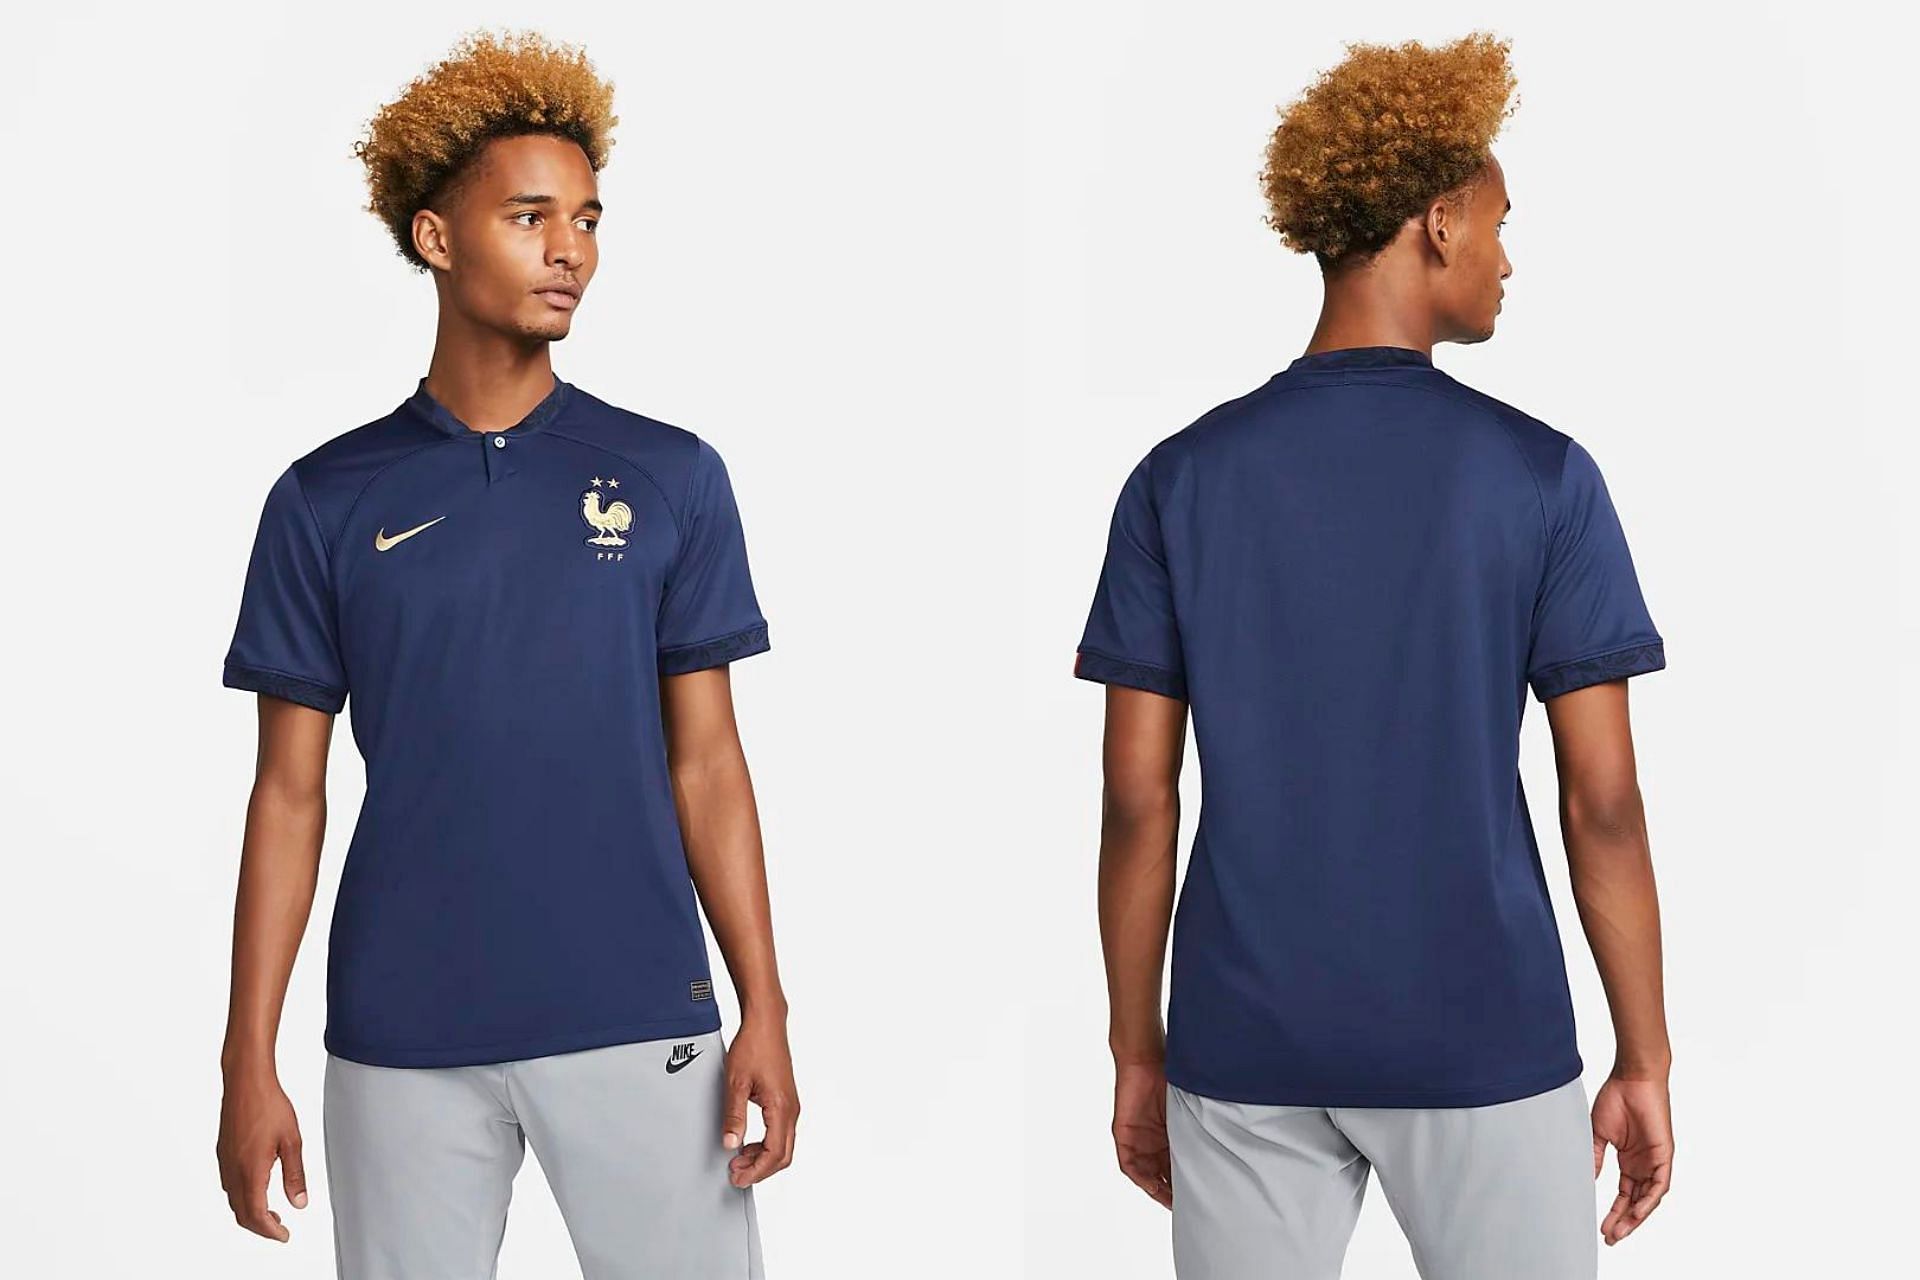 The recently released Nike x France National football team 2022-23 home kit, which comes inspired by the France Nouveau (Image via Nike)